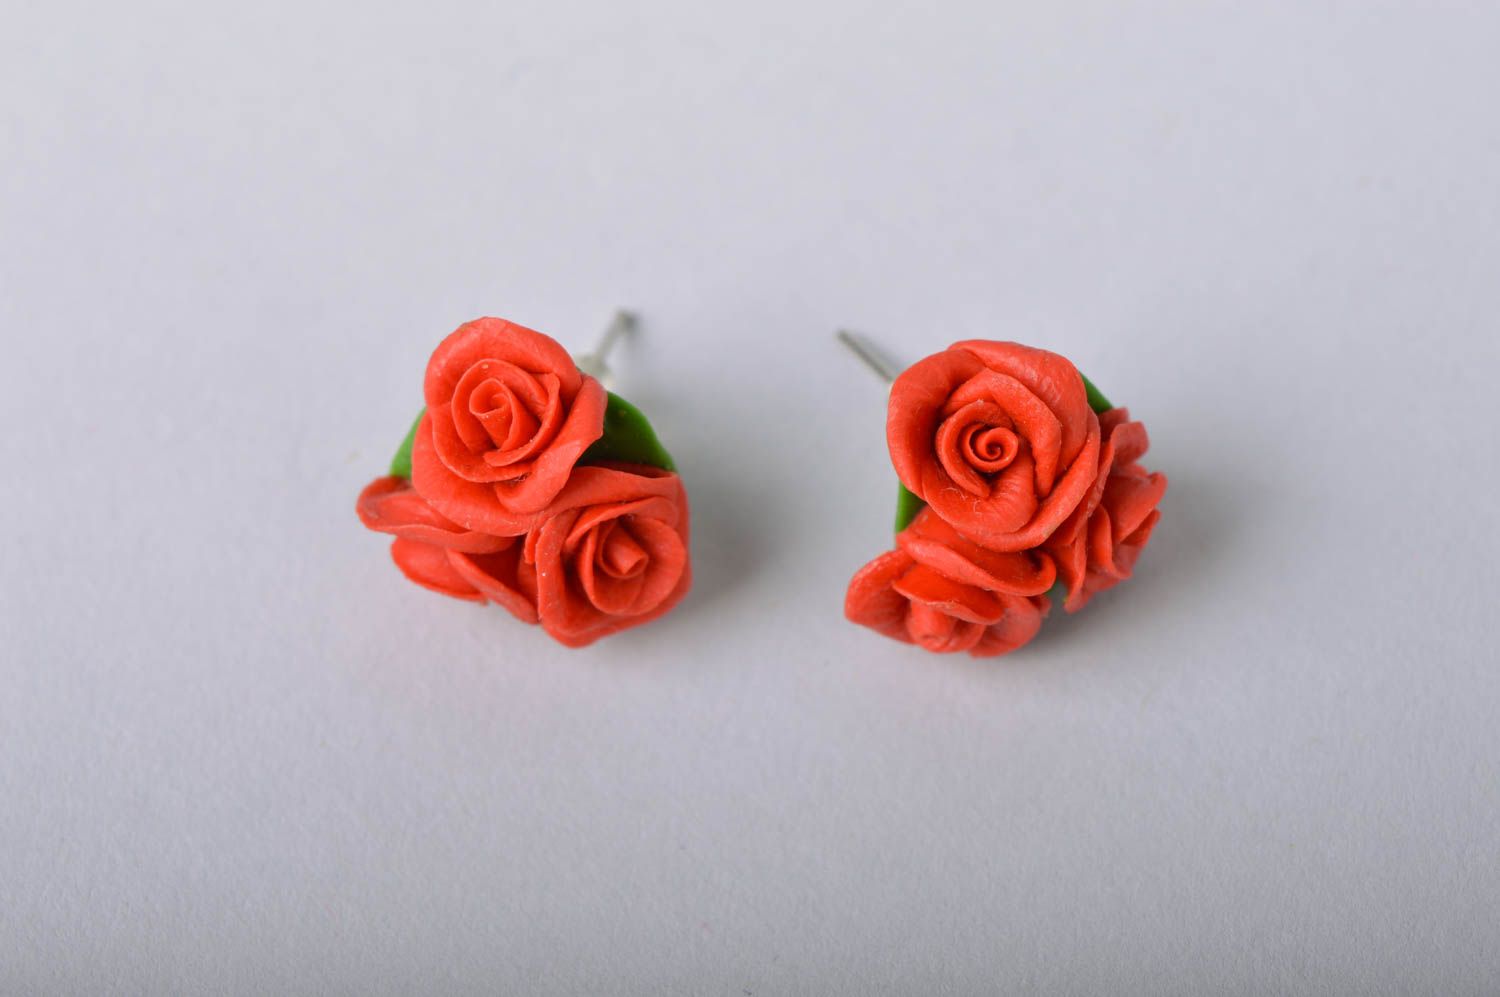 Handmade flower stud earrings made of cold porcelain in shape of red roses photo 2